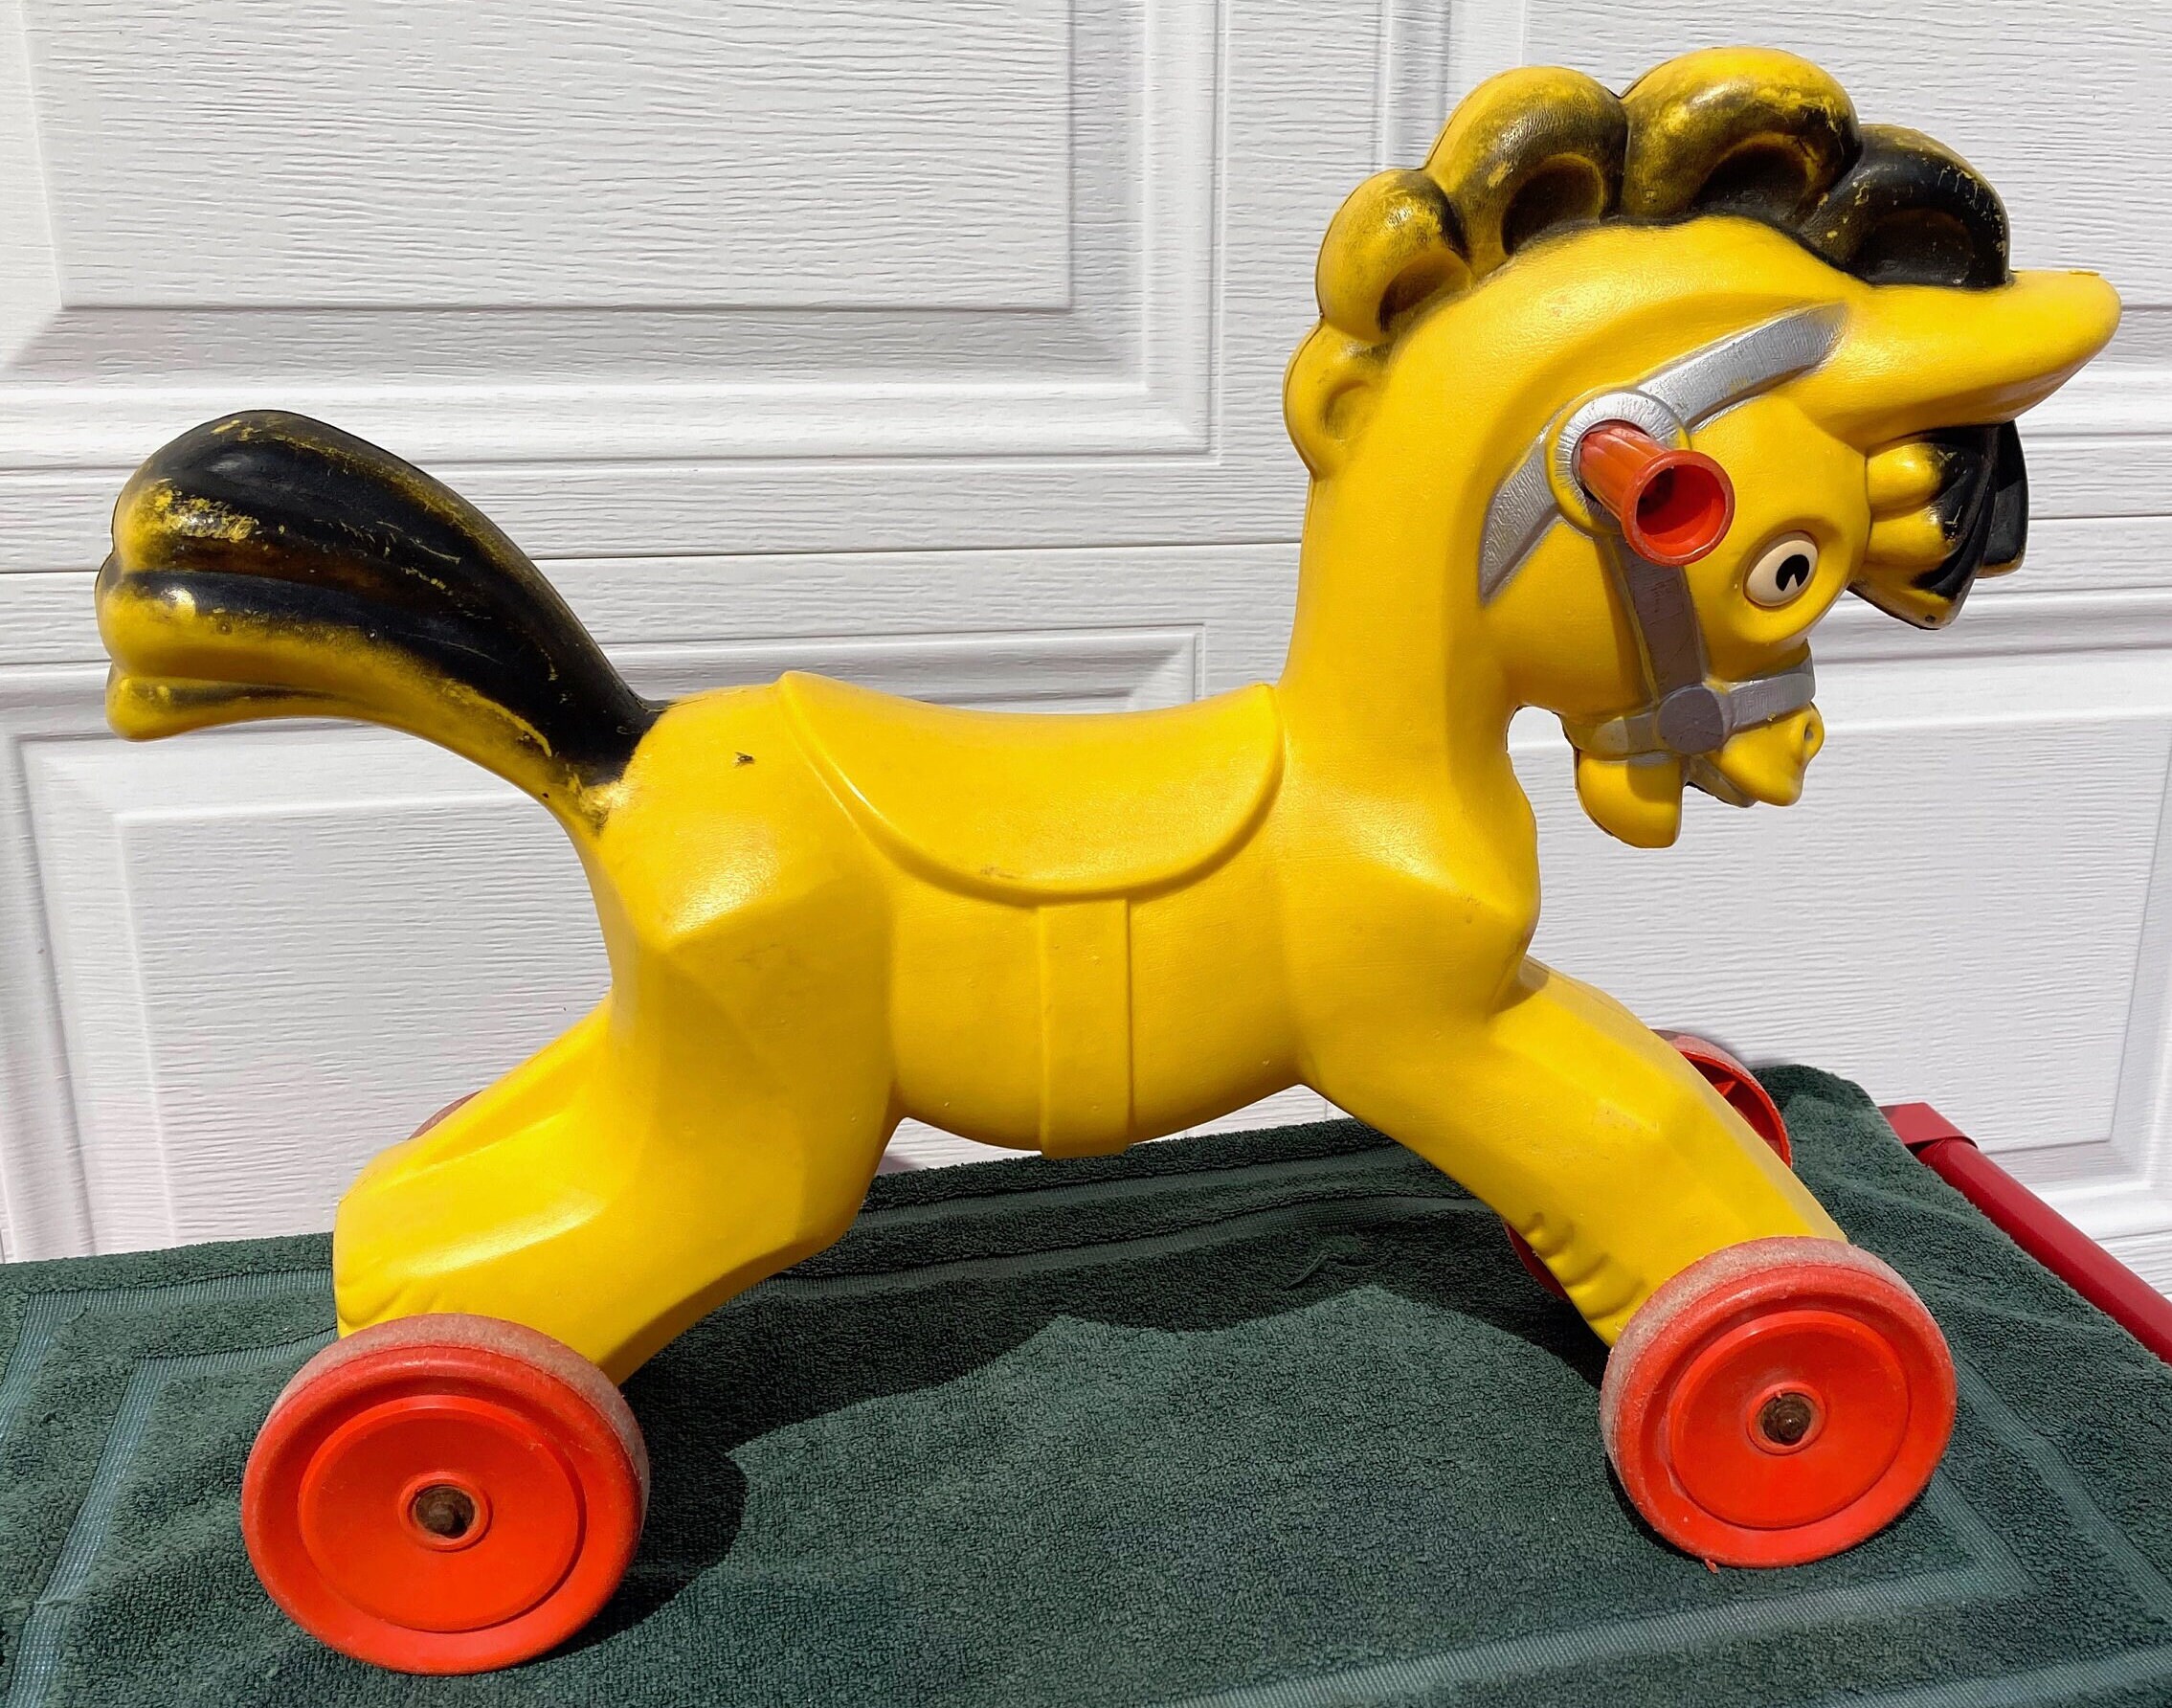 1965 Blaxon Childrens Plastic Riding Horse on Casters 19 W X 17 Vintage  Toy, Doll Collector Decor, Vintage Childrens Horse -  Israel